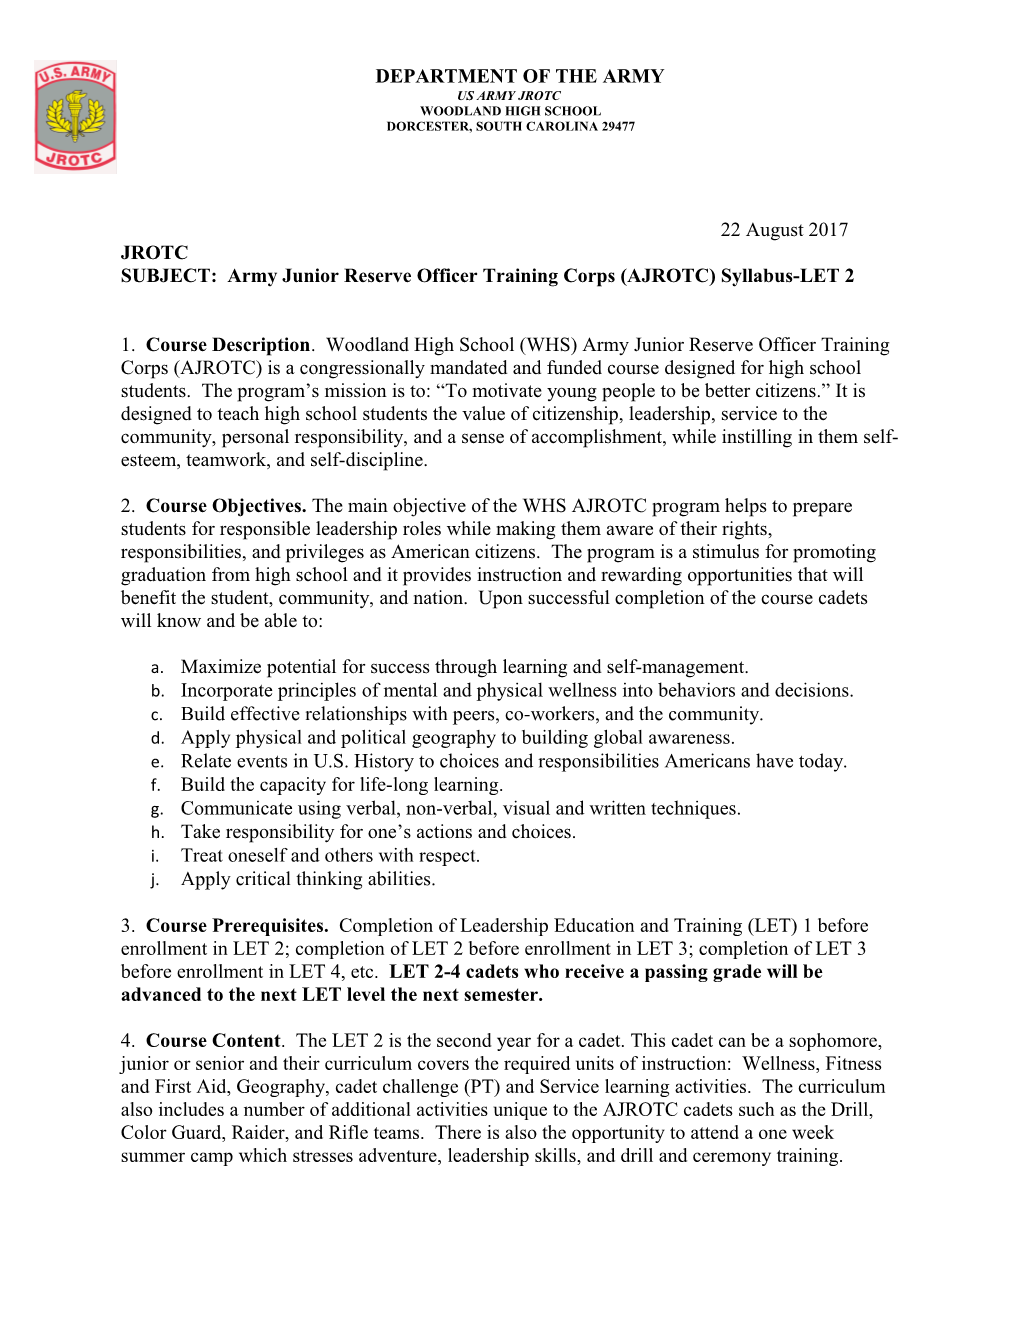 SUBJECT: Army Junior Reserve Officer Training Corps (AJROTC) Syllabus-LET 2